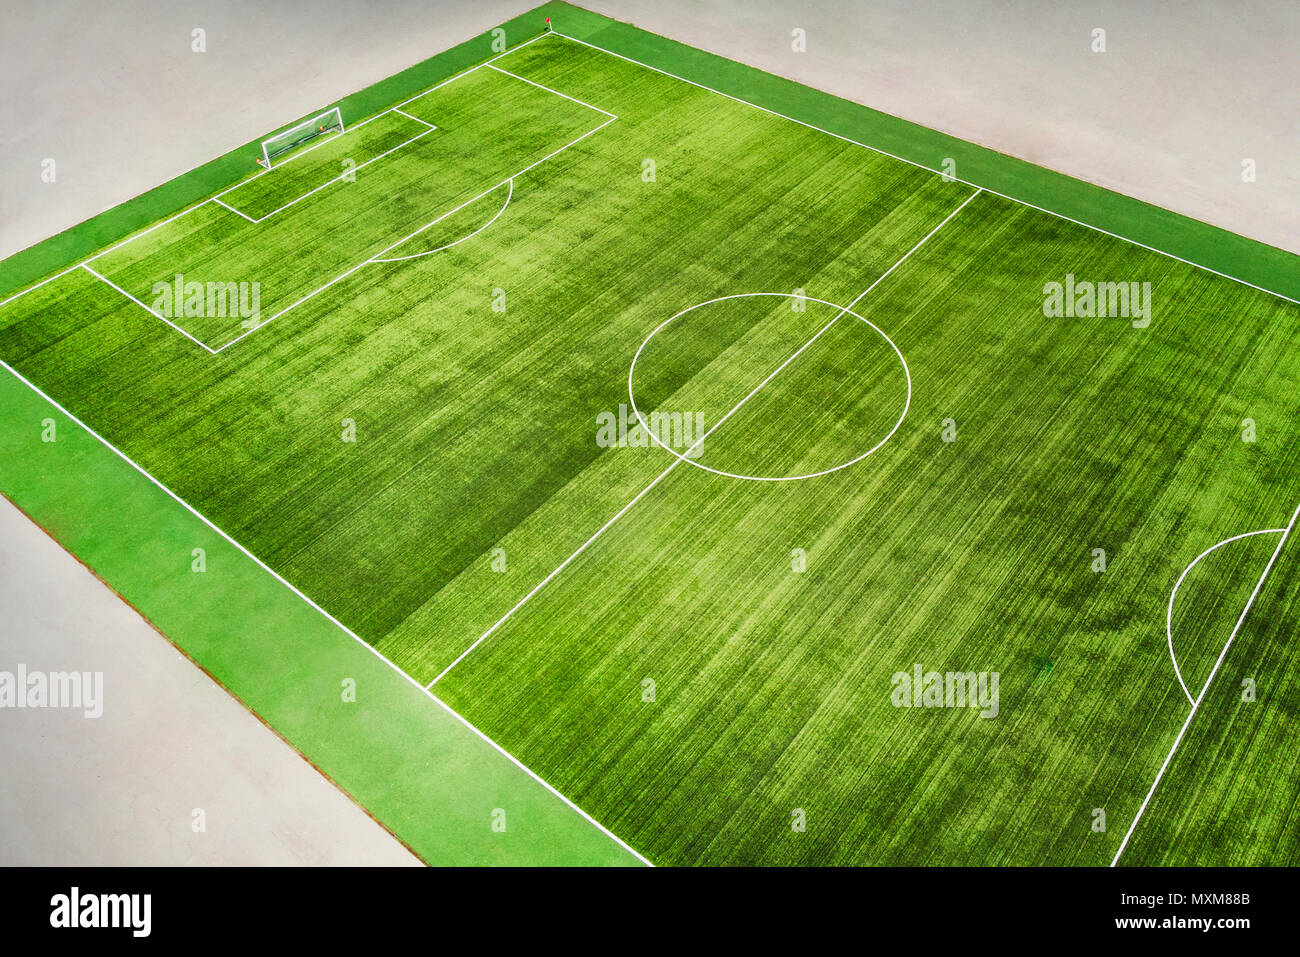 a real soccer field with lines on grass. Top view at an angle Stock Photo